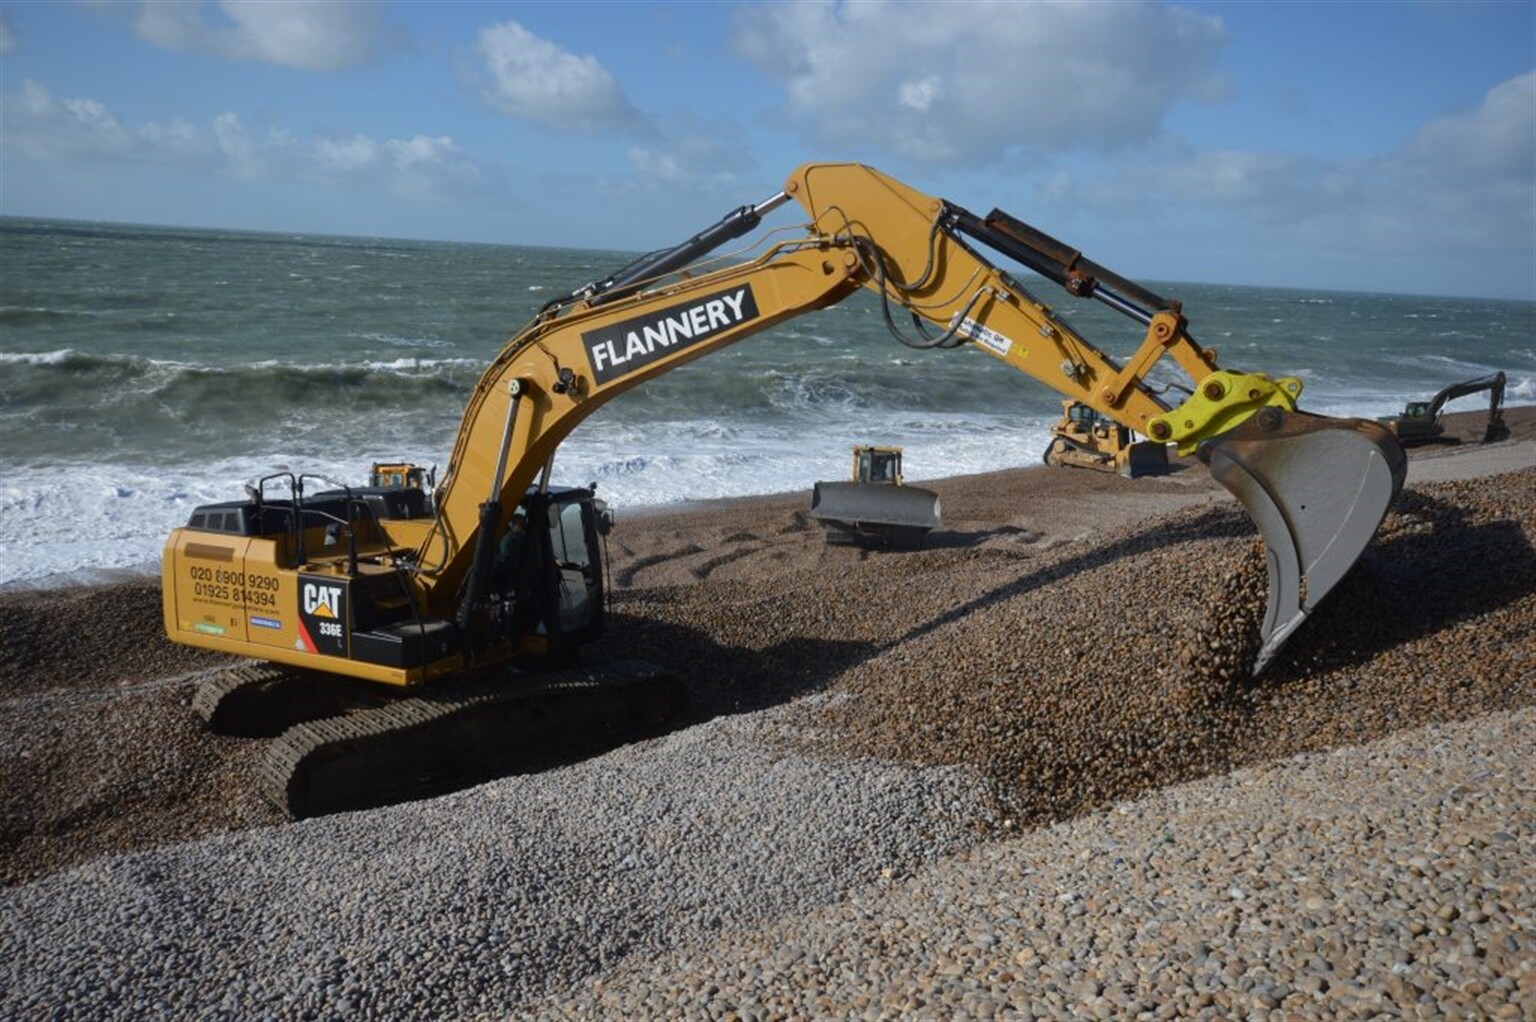 Flannery Plant Hire choose GKD Technologies RCis for ease of use and efficiency.